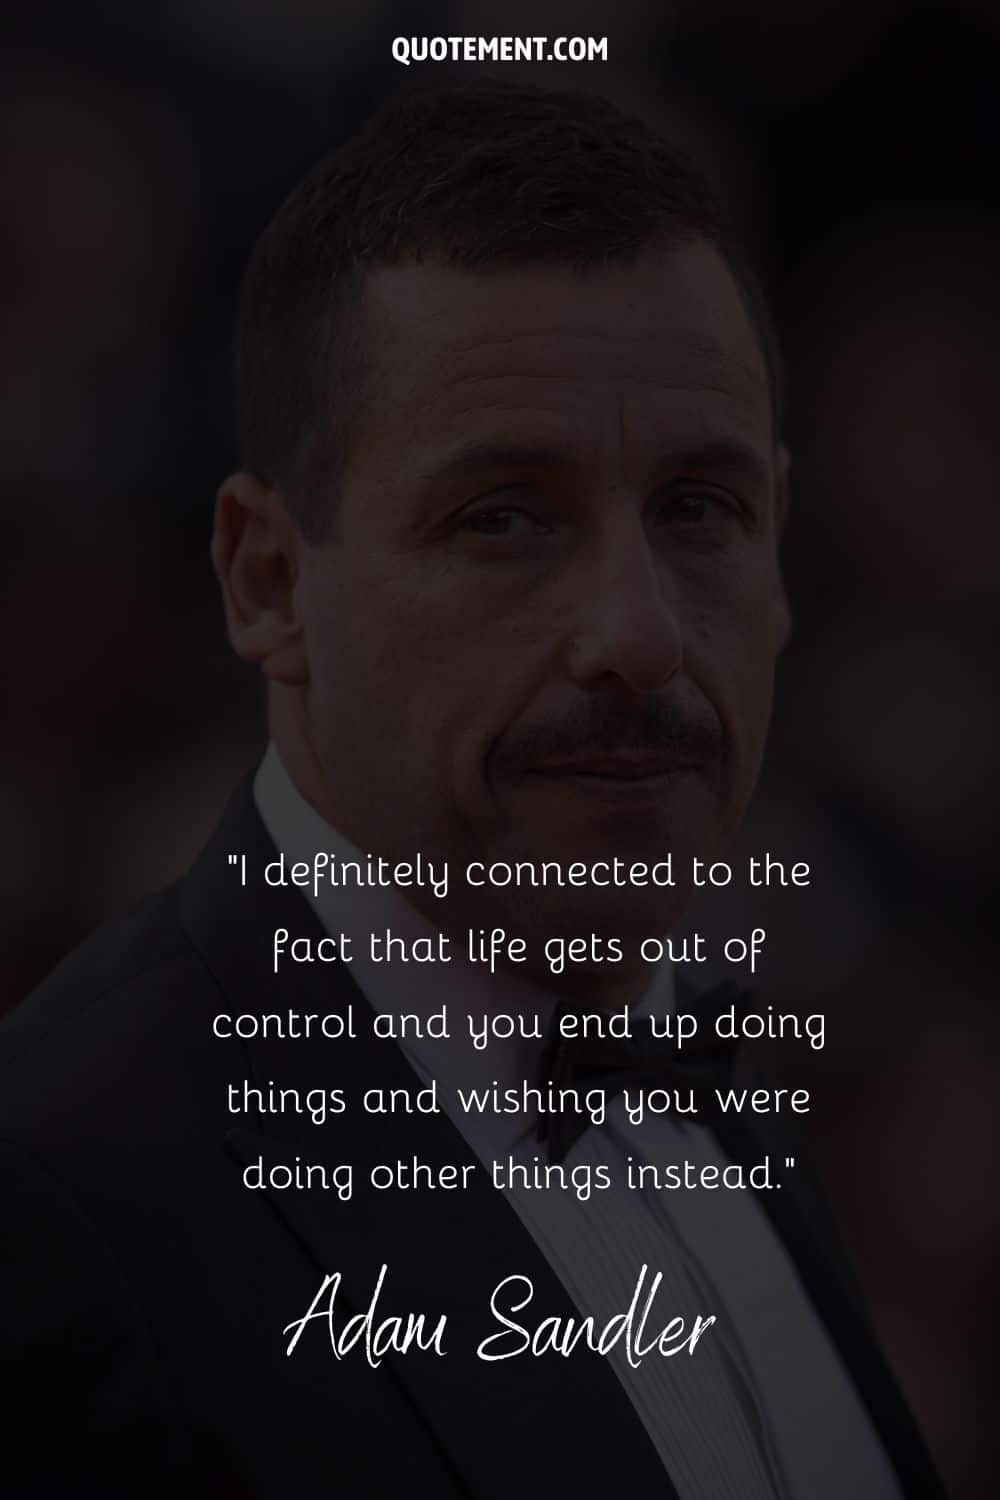 wise words on life by Adam Sandler